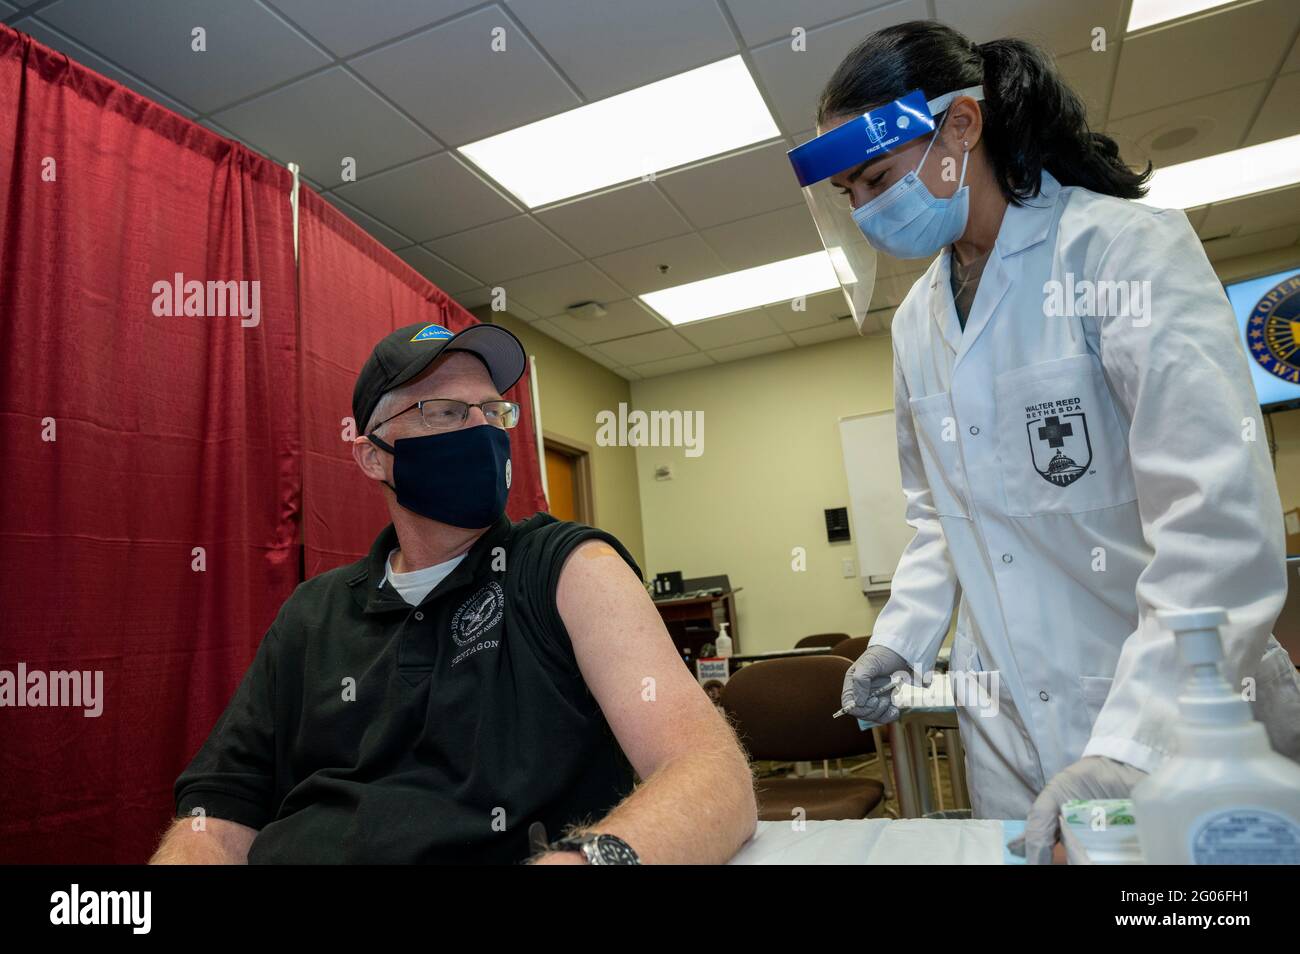 Reportage:  Acting Defense Secretary Chris Miller talks with Navy Hospitalman Samantha Alvarez, after she administered a COVID-19 vaccine to him, Walter Reed National Military Medical Center, Bethesda, Md., Dec. 14, 2020. Stock Photo